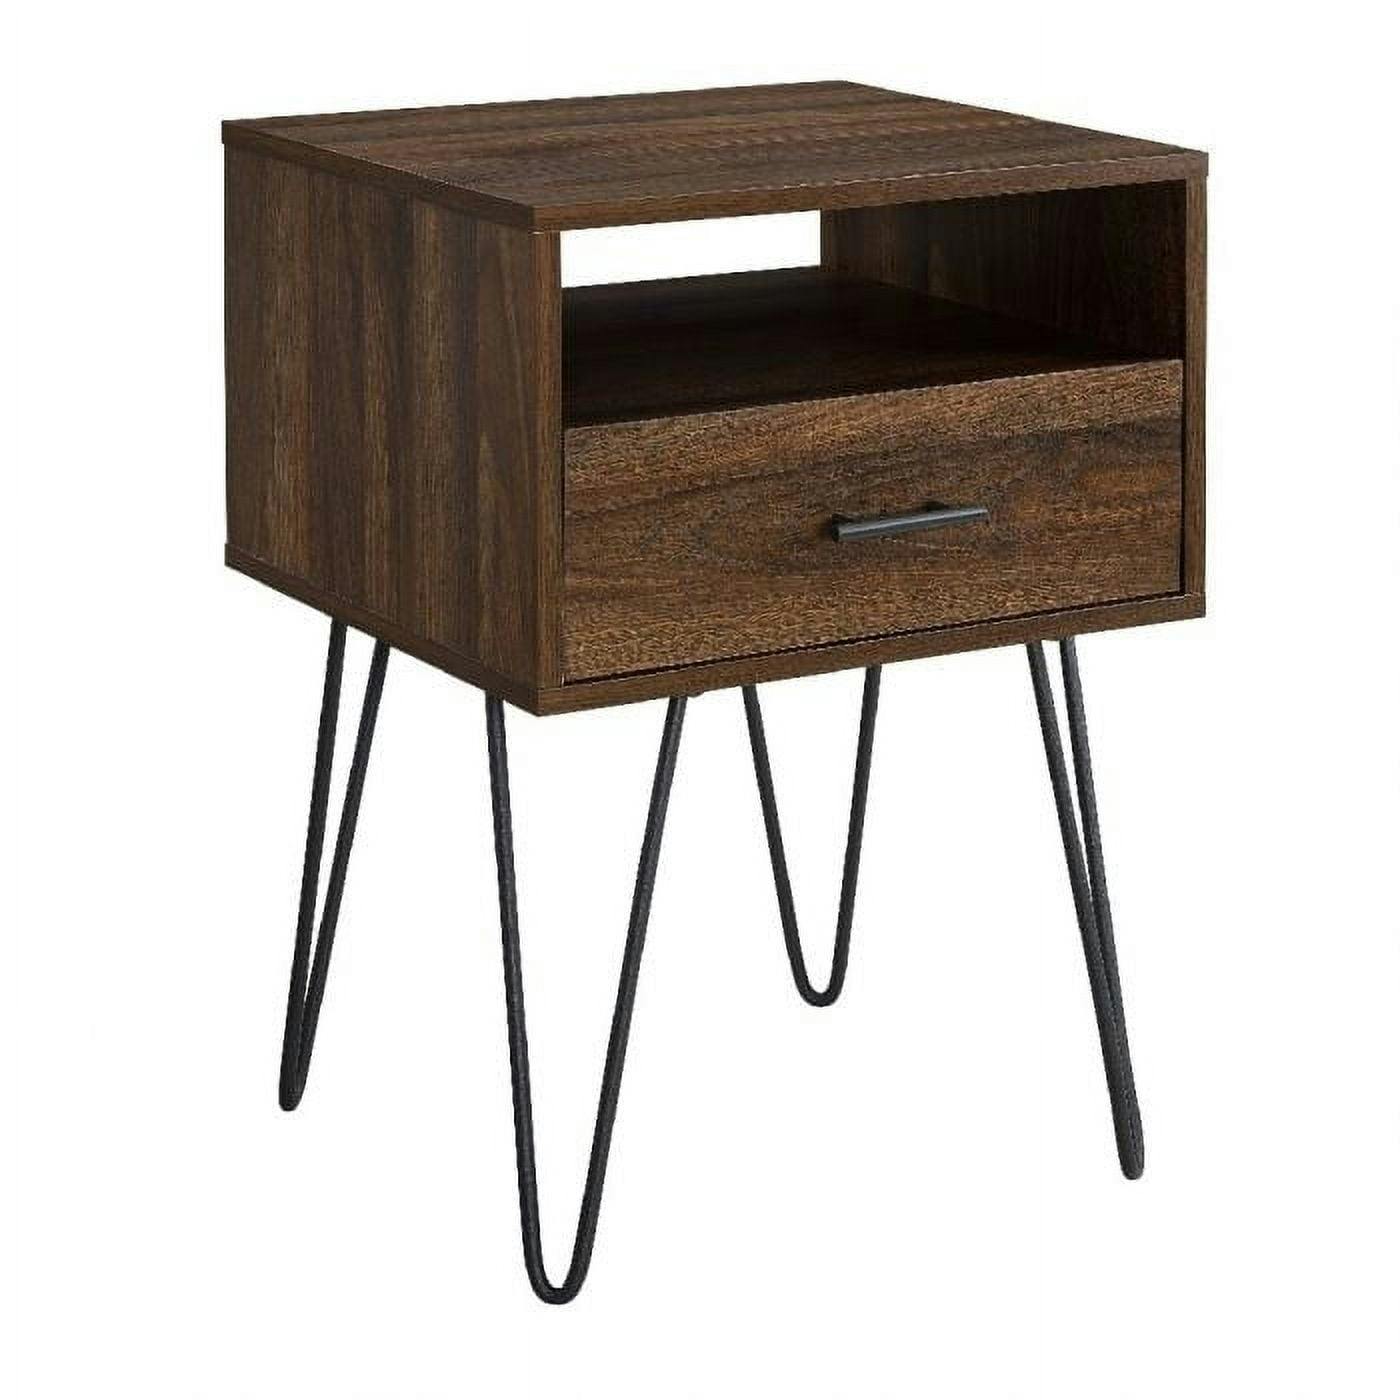 Contemporary Dark Walnut Hairpin Leg Side Table with Drawer